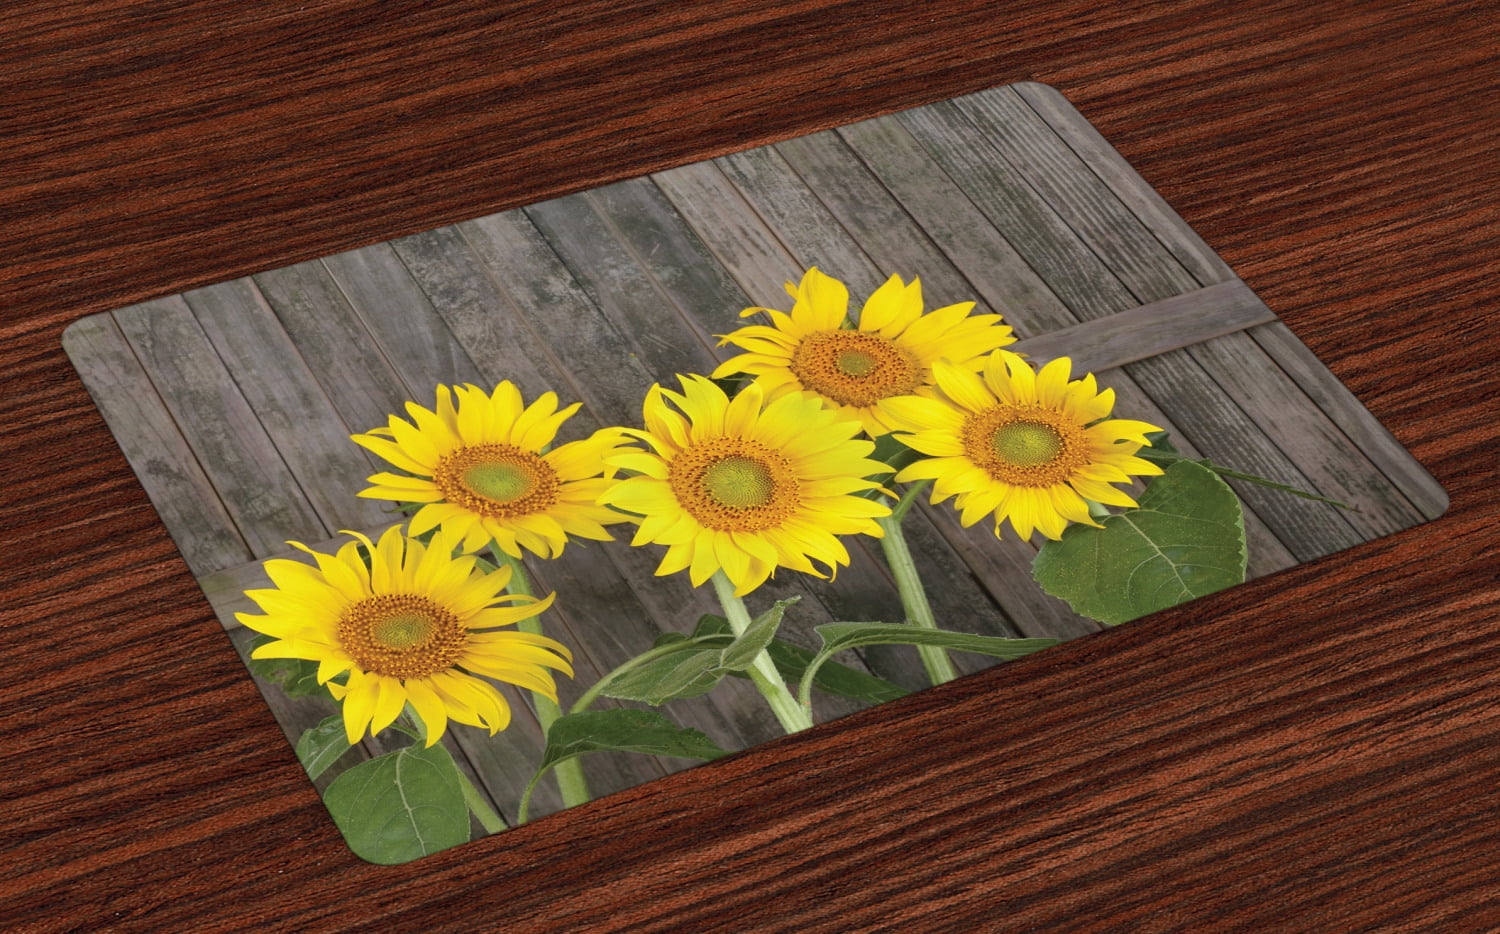 ALAZA Orange Sunflower Placemats Set of 6 for Dining Table Washable Polyester Placemat Non-Slip Heat Resistant Kitchen Table Mats Easy to Clean